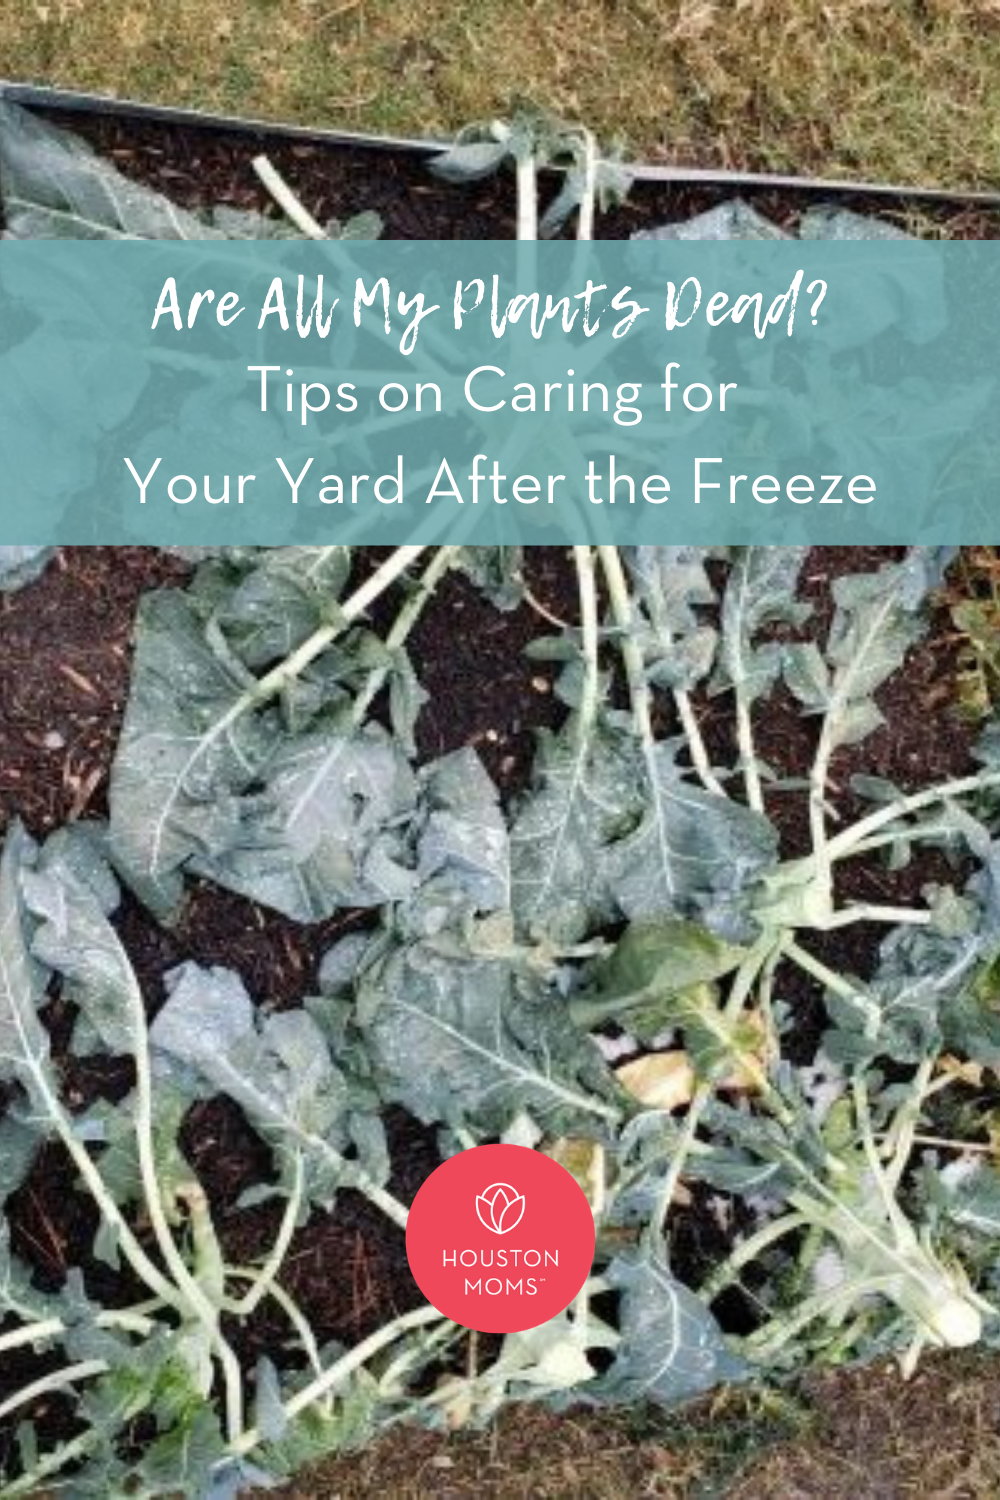 Houston Moms "Are All My Plants Dead? Tips on Caring for Your Yard After the Freeze" #houstonmoms #momsaroundhouston